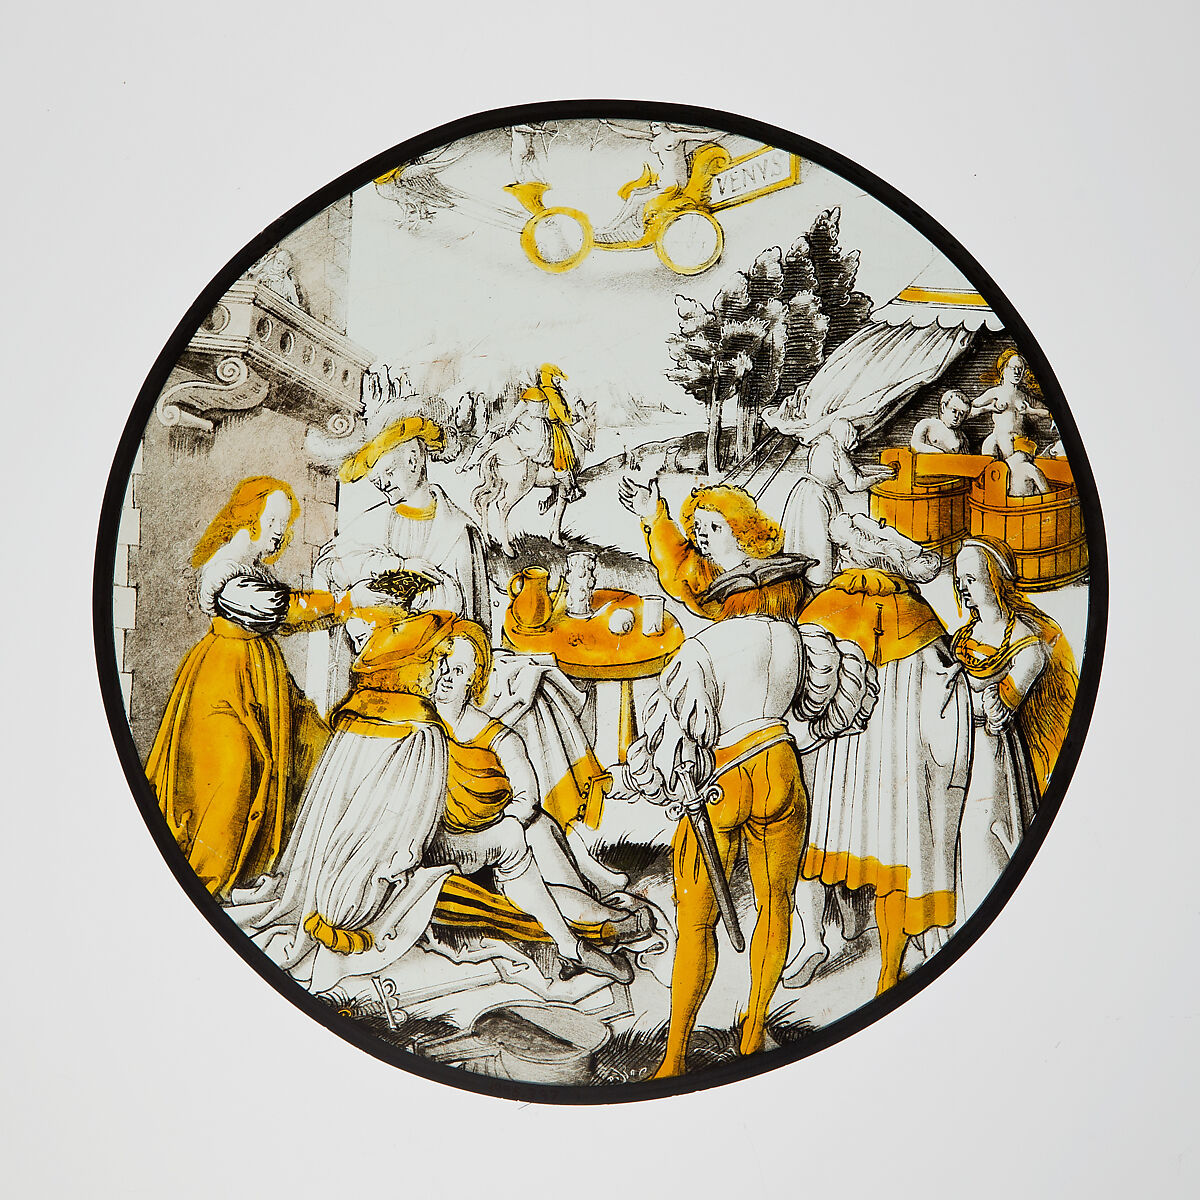 Roundel of The Planet Venus and Her Children, After Jörg Breu the Elder (German, Augsburg 1480–1537 Augsburg), Colorless glass, vitreous paint, silver stain, German 